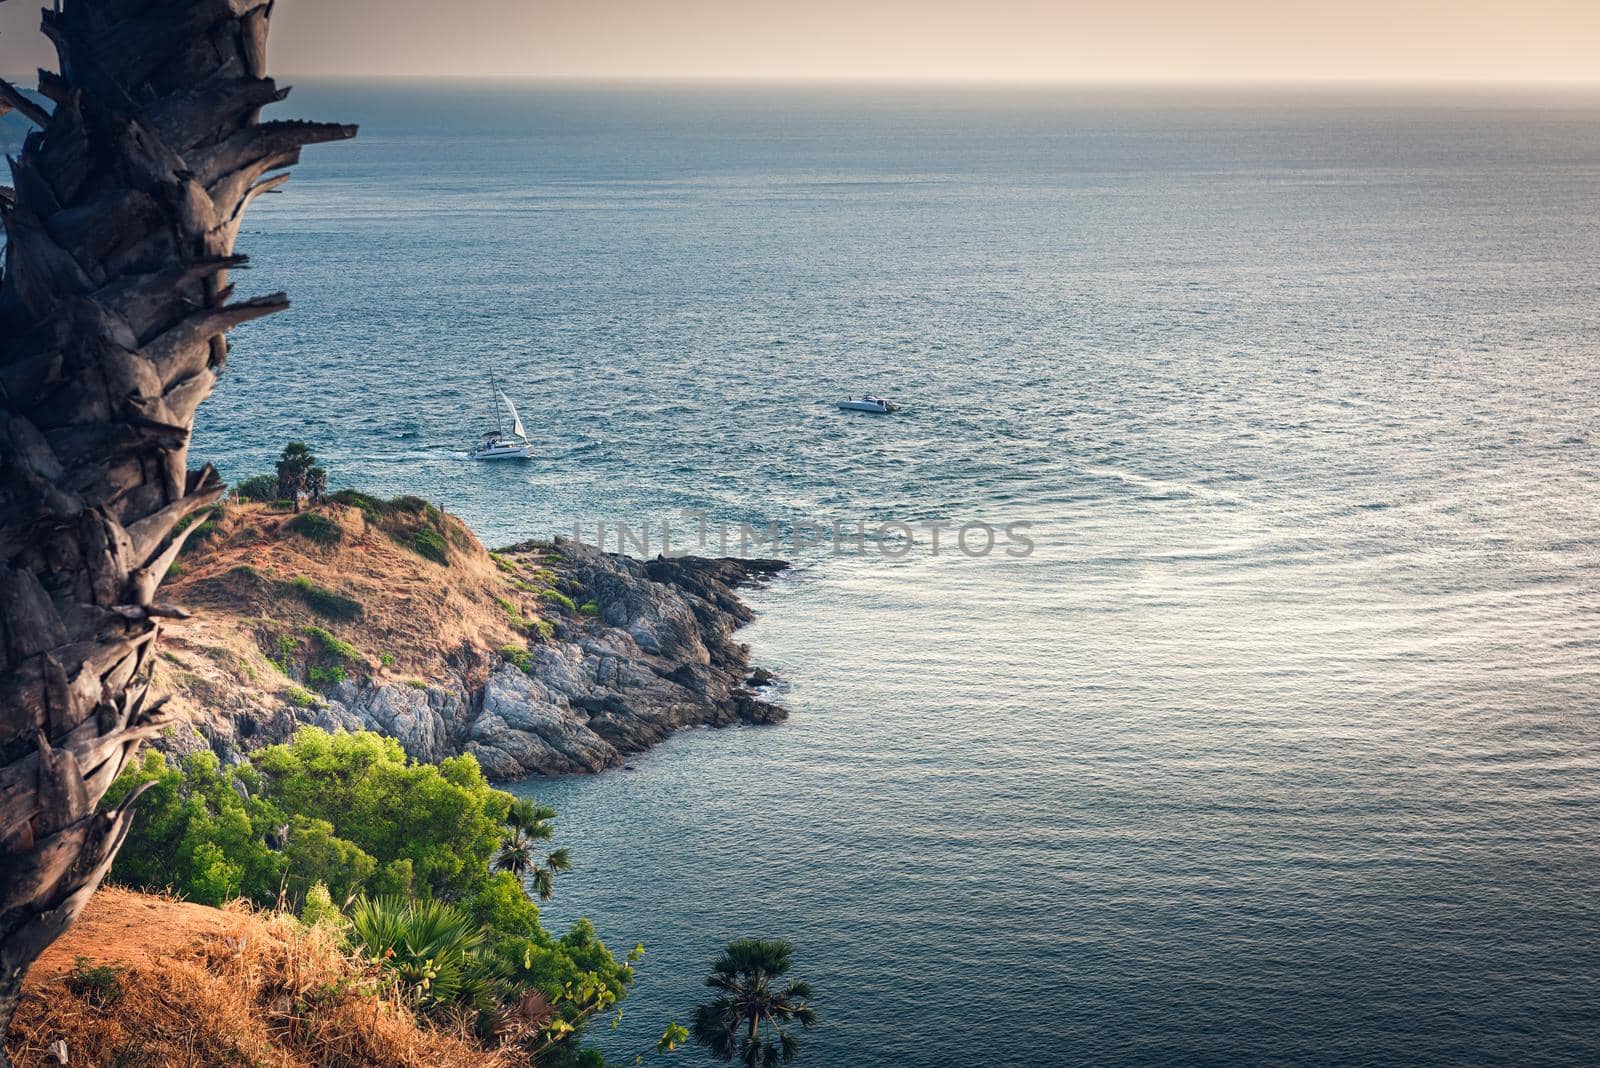 Nature Landscape Scenery of Tropical Seascape Thailand at Sunset, Panorama View of Sea Paradise Island in Southeast Asia, Thailand Destination of Travel Tourist. Natural Backgrounds by MahaHeang245789